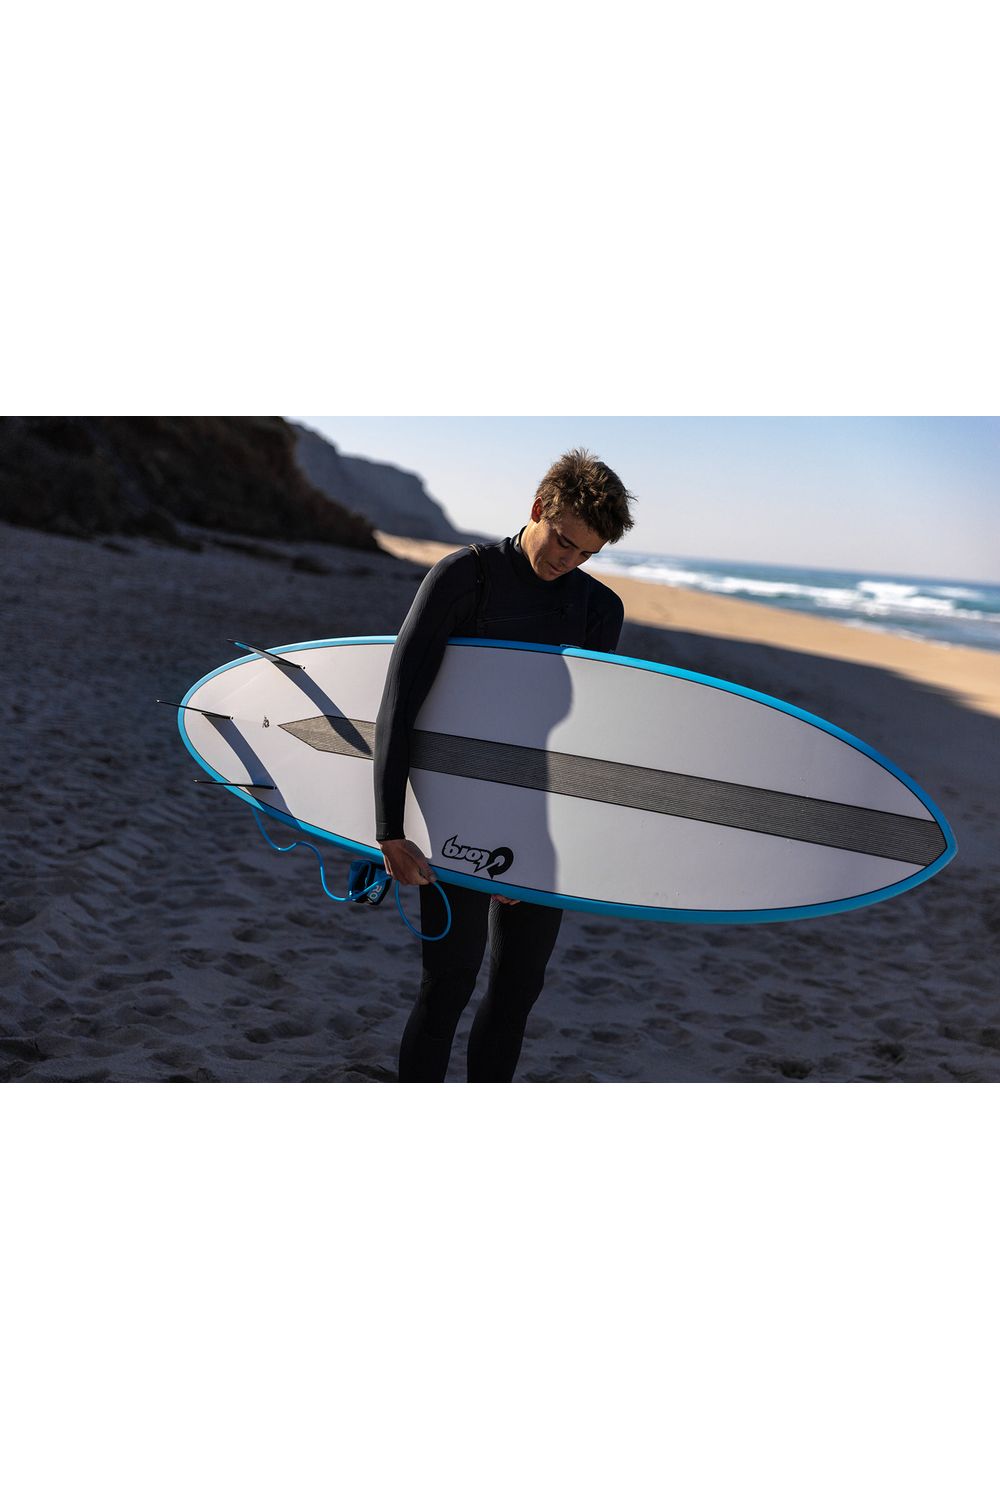 Torq TET Mod Fun Surfboard with Carbon Strip in White